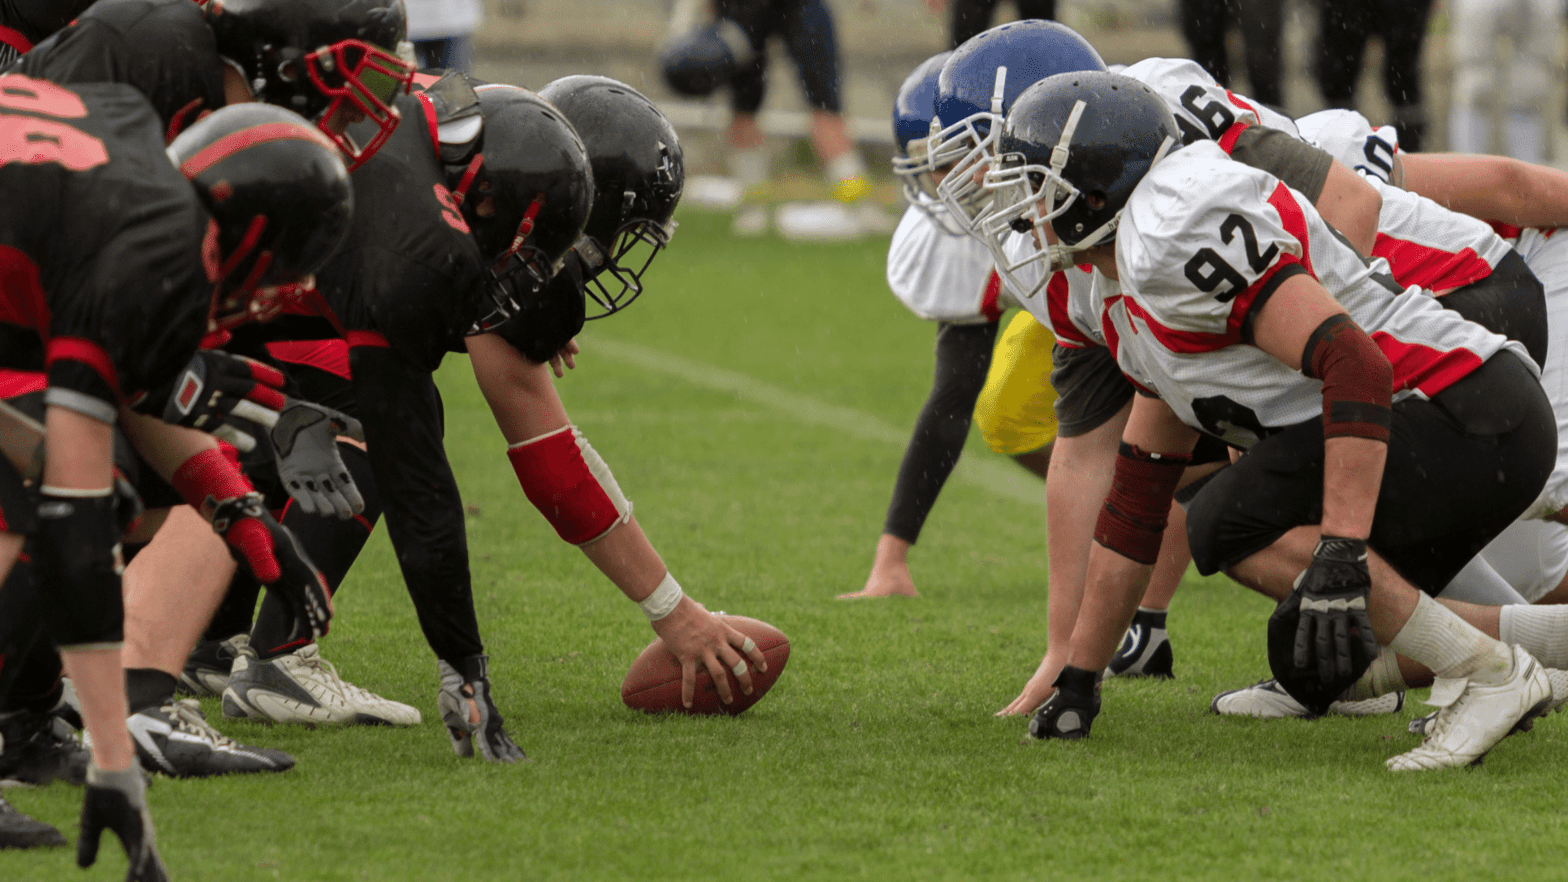 Most Common Football Injuries in Orthopedics & Sports Medicine